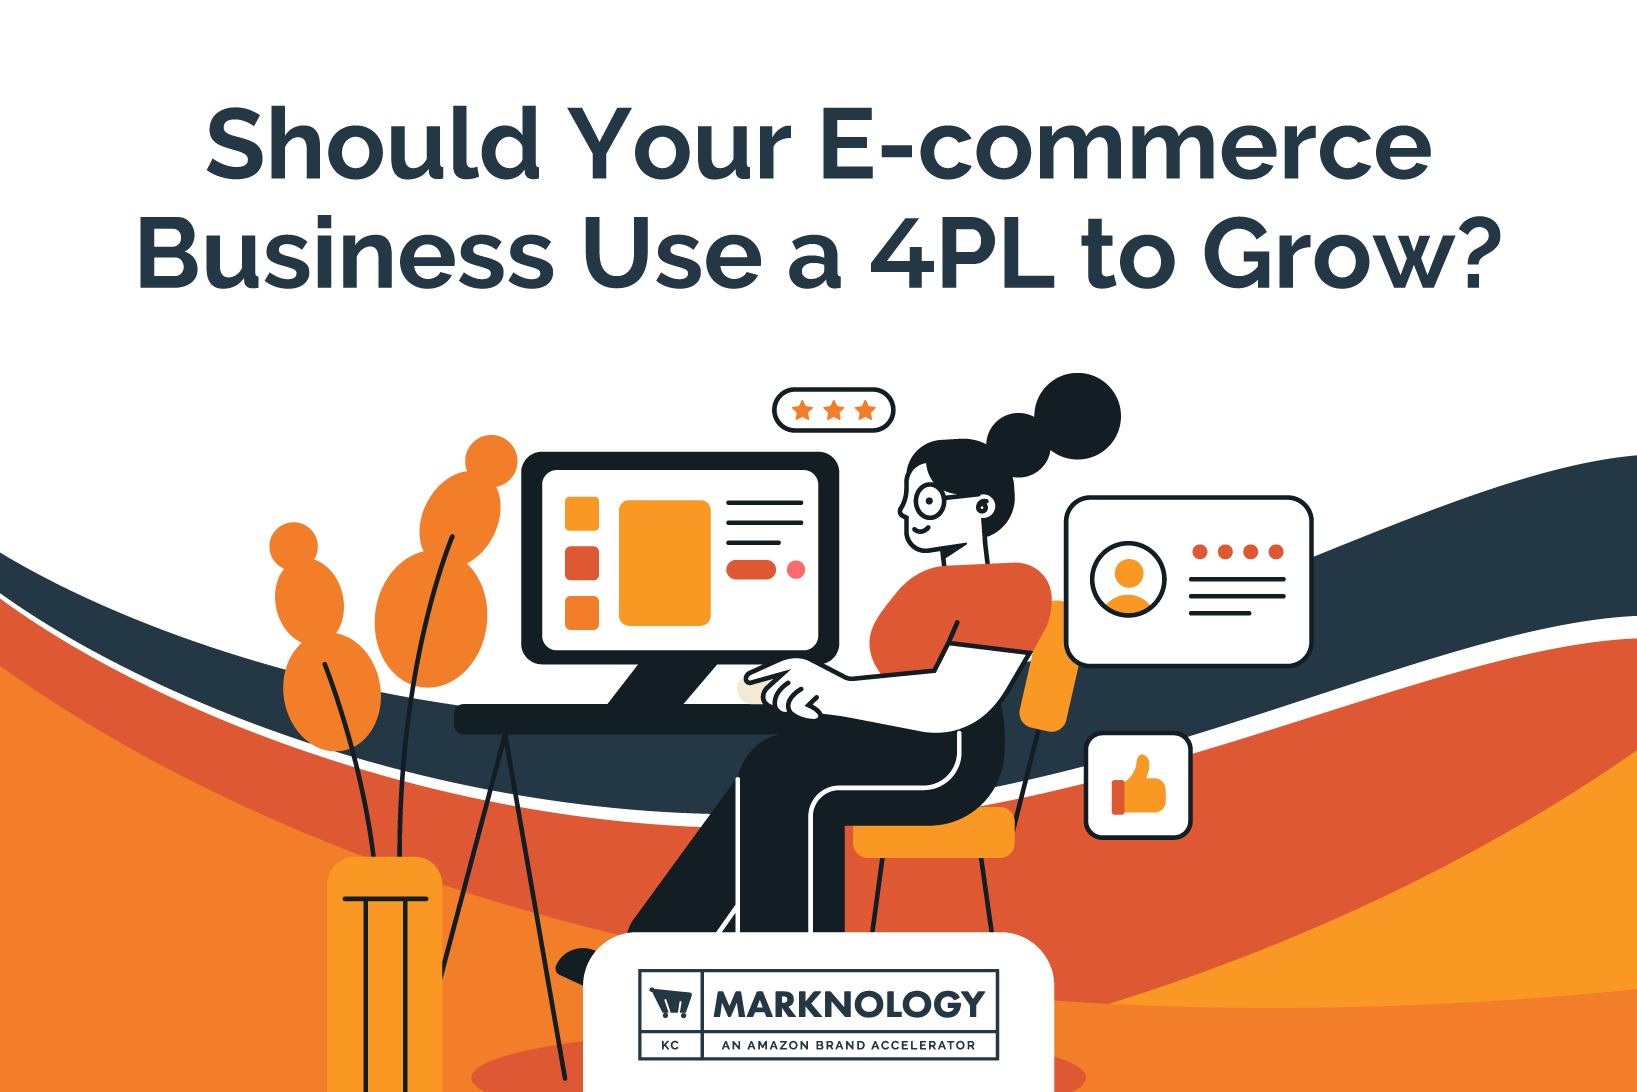 Should Your E-commerce Business Use a 4PL to Grow?